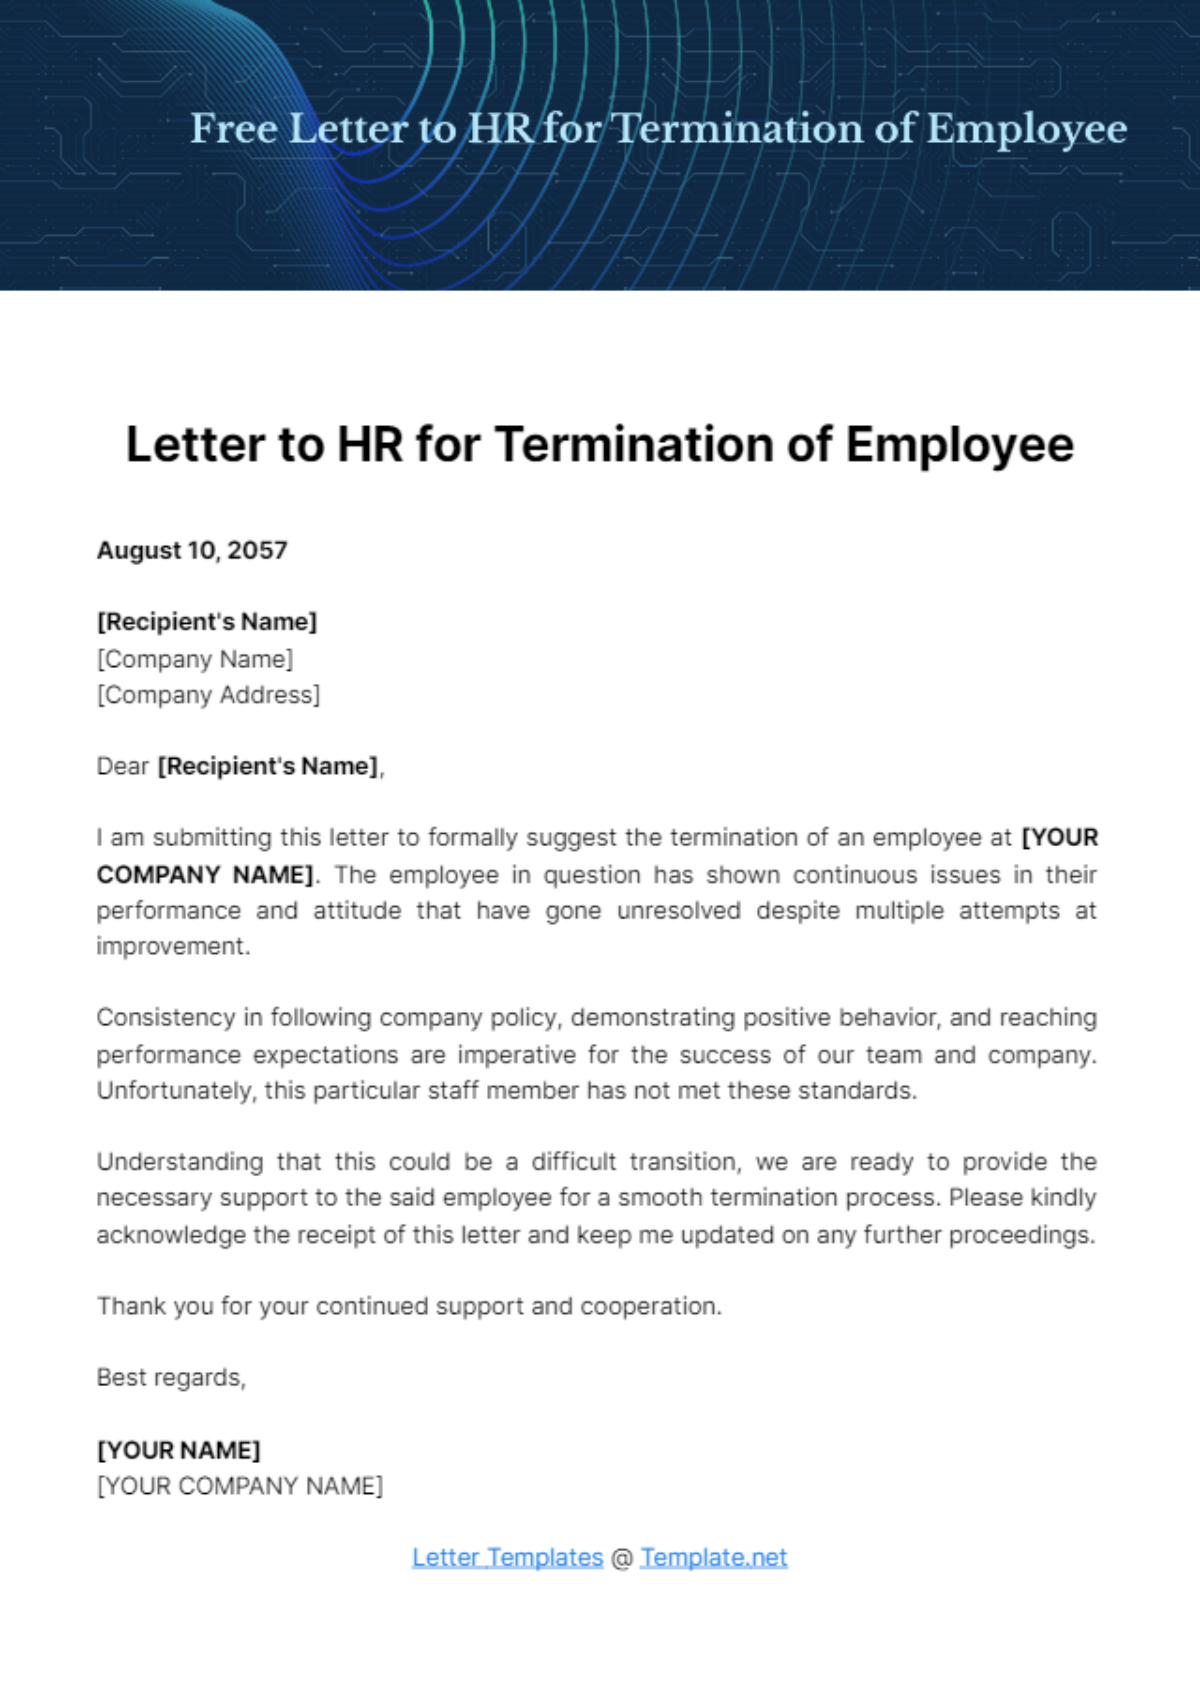 Free Letter to HR for Termination of Employee Template